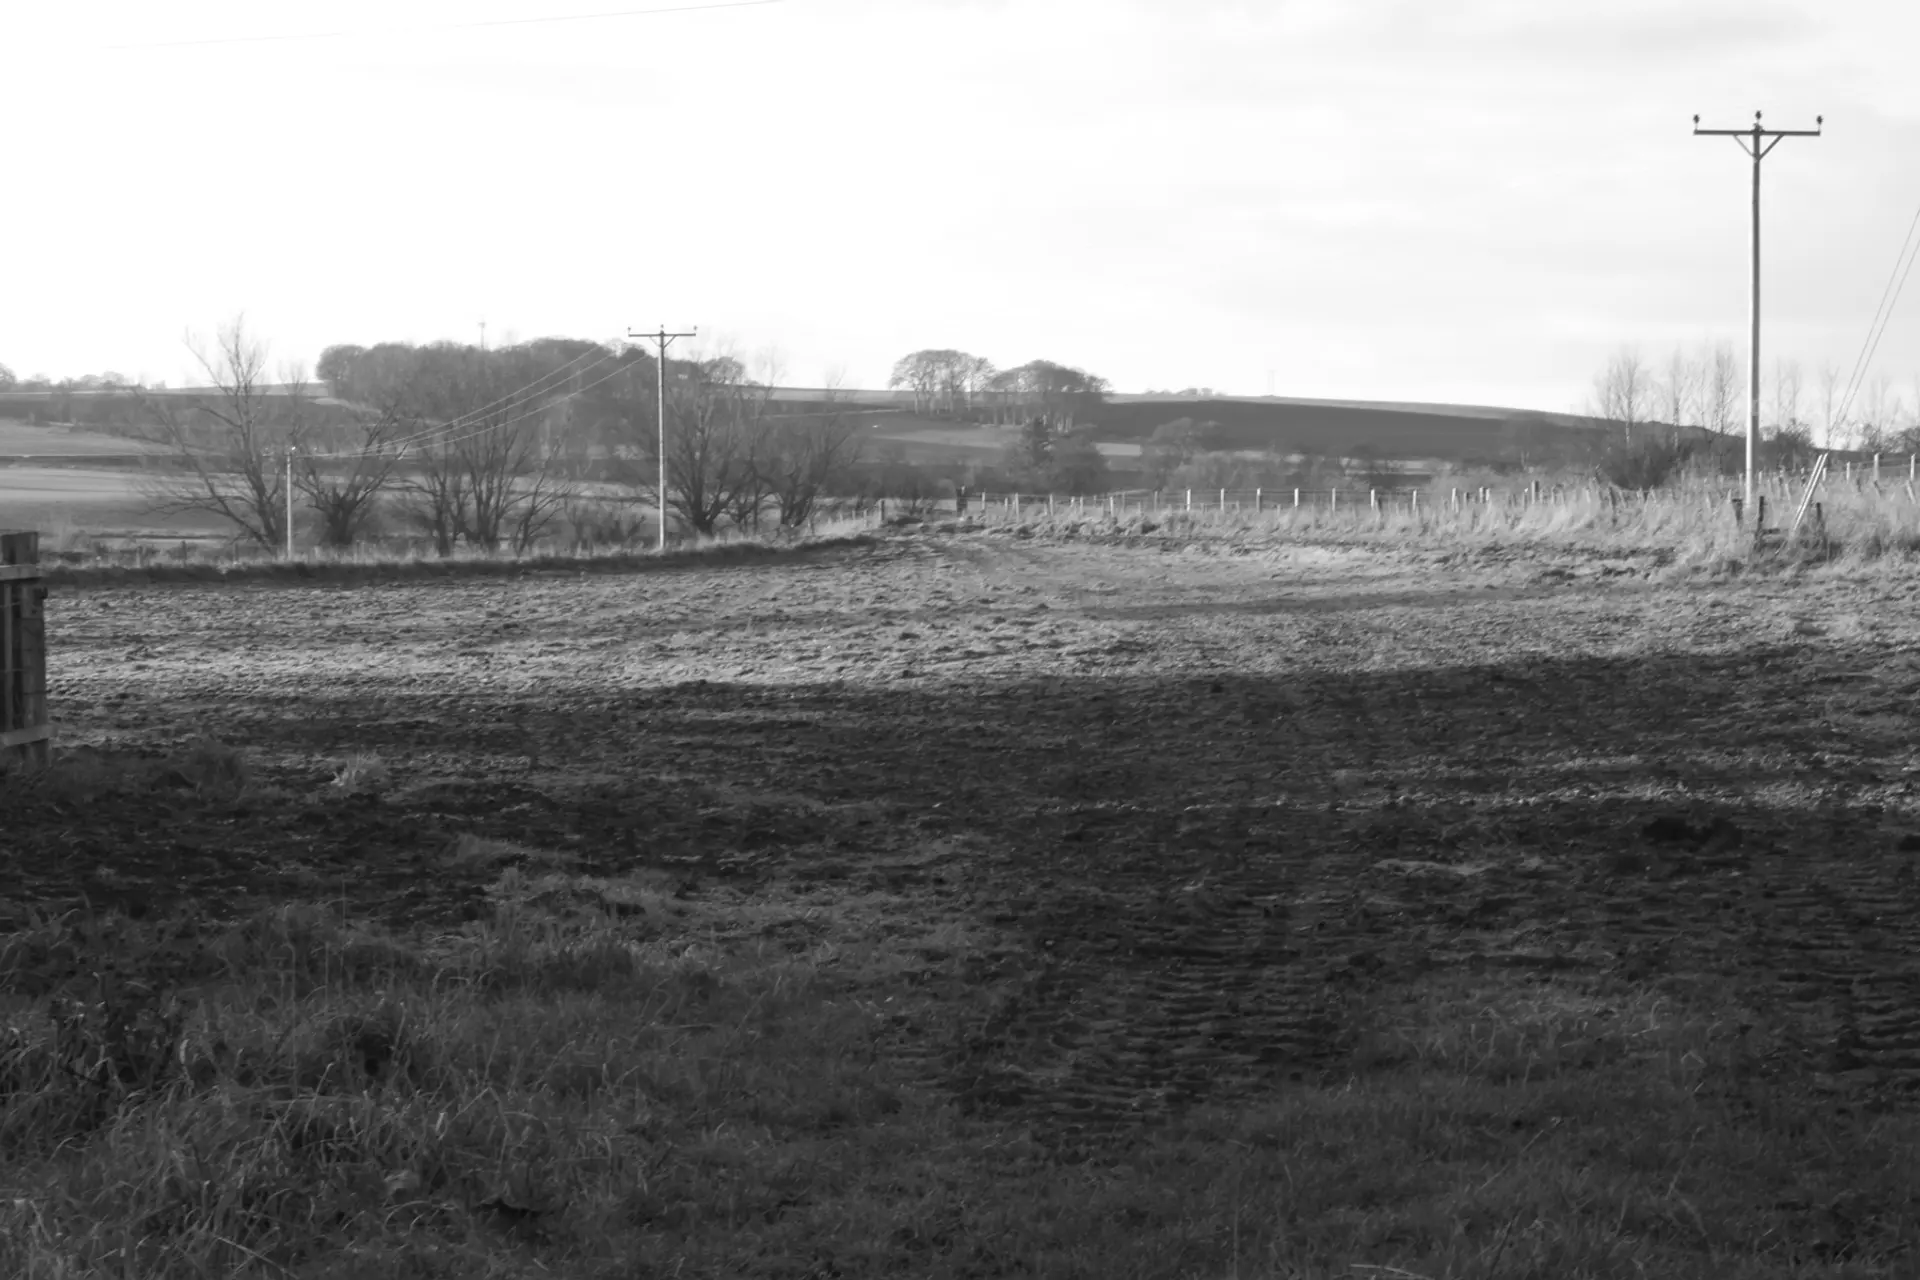 A grayscale image of a field, telegraph poles line the boundary of the field, and the hills gently rise in the distance.